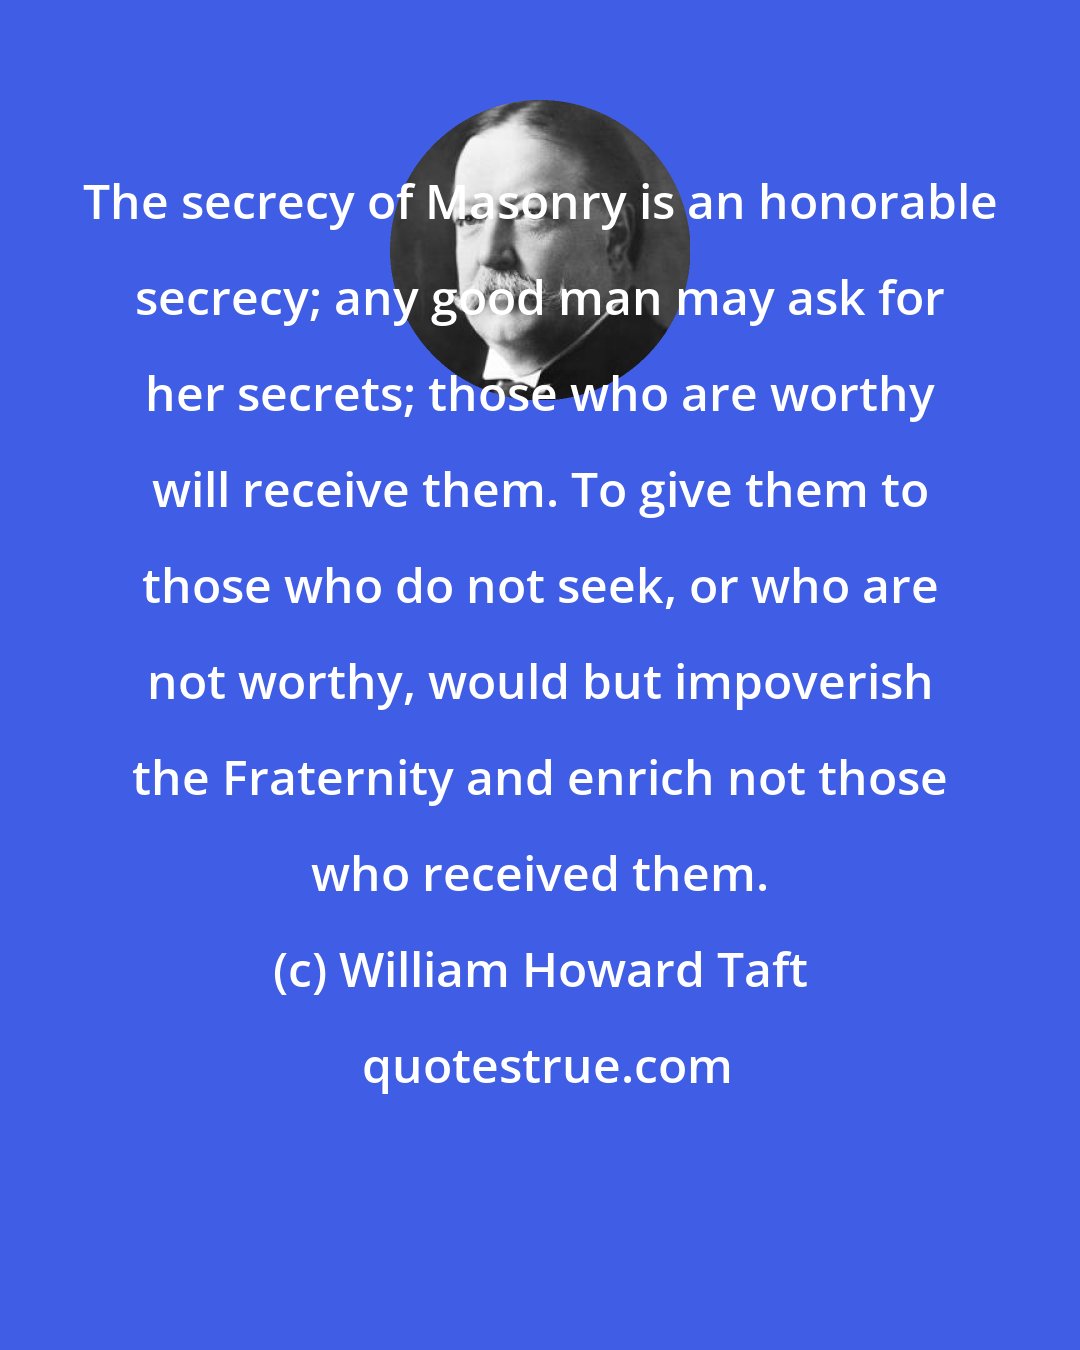 William Howard Taft: The secrecy of Masonry is an honorable secrecy; any good man may ask for her secrets; those who are worthy will receive them. To give them to those who do not seek, or who are not worthy, would but impoverish the Fraternity and enrich not those who received them.